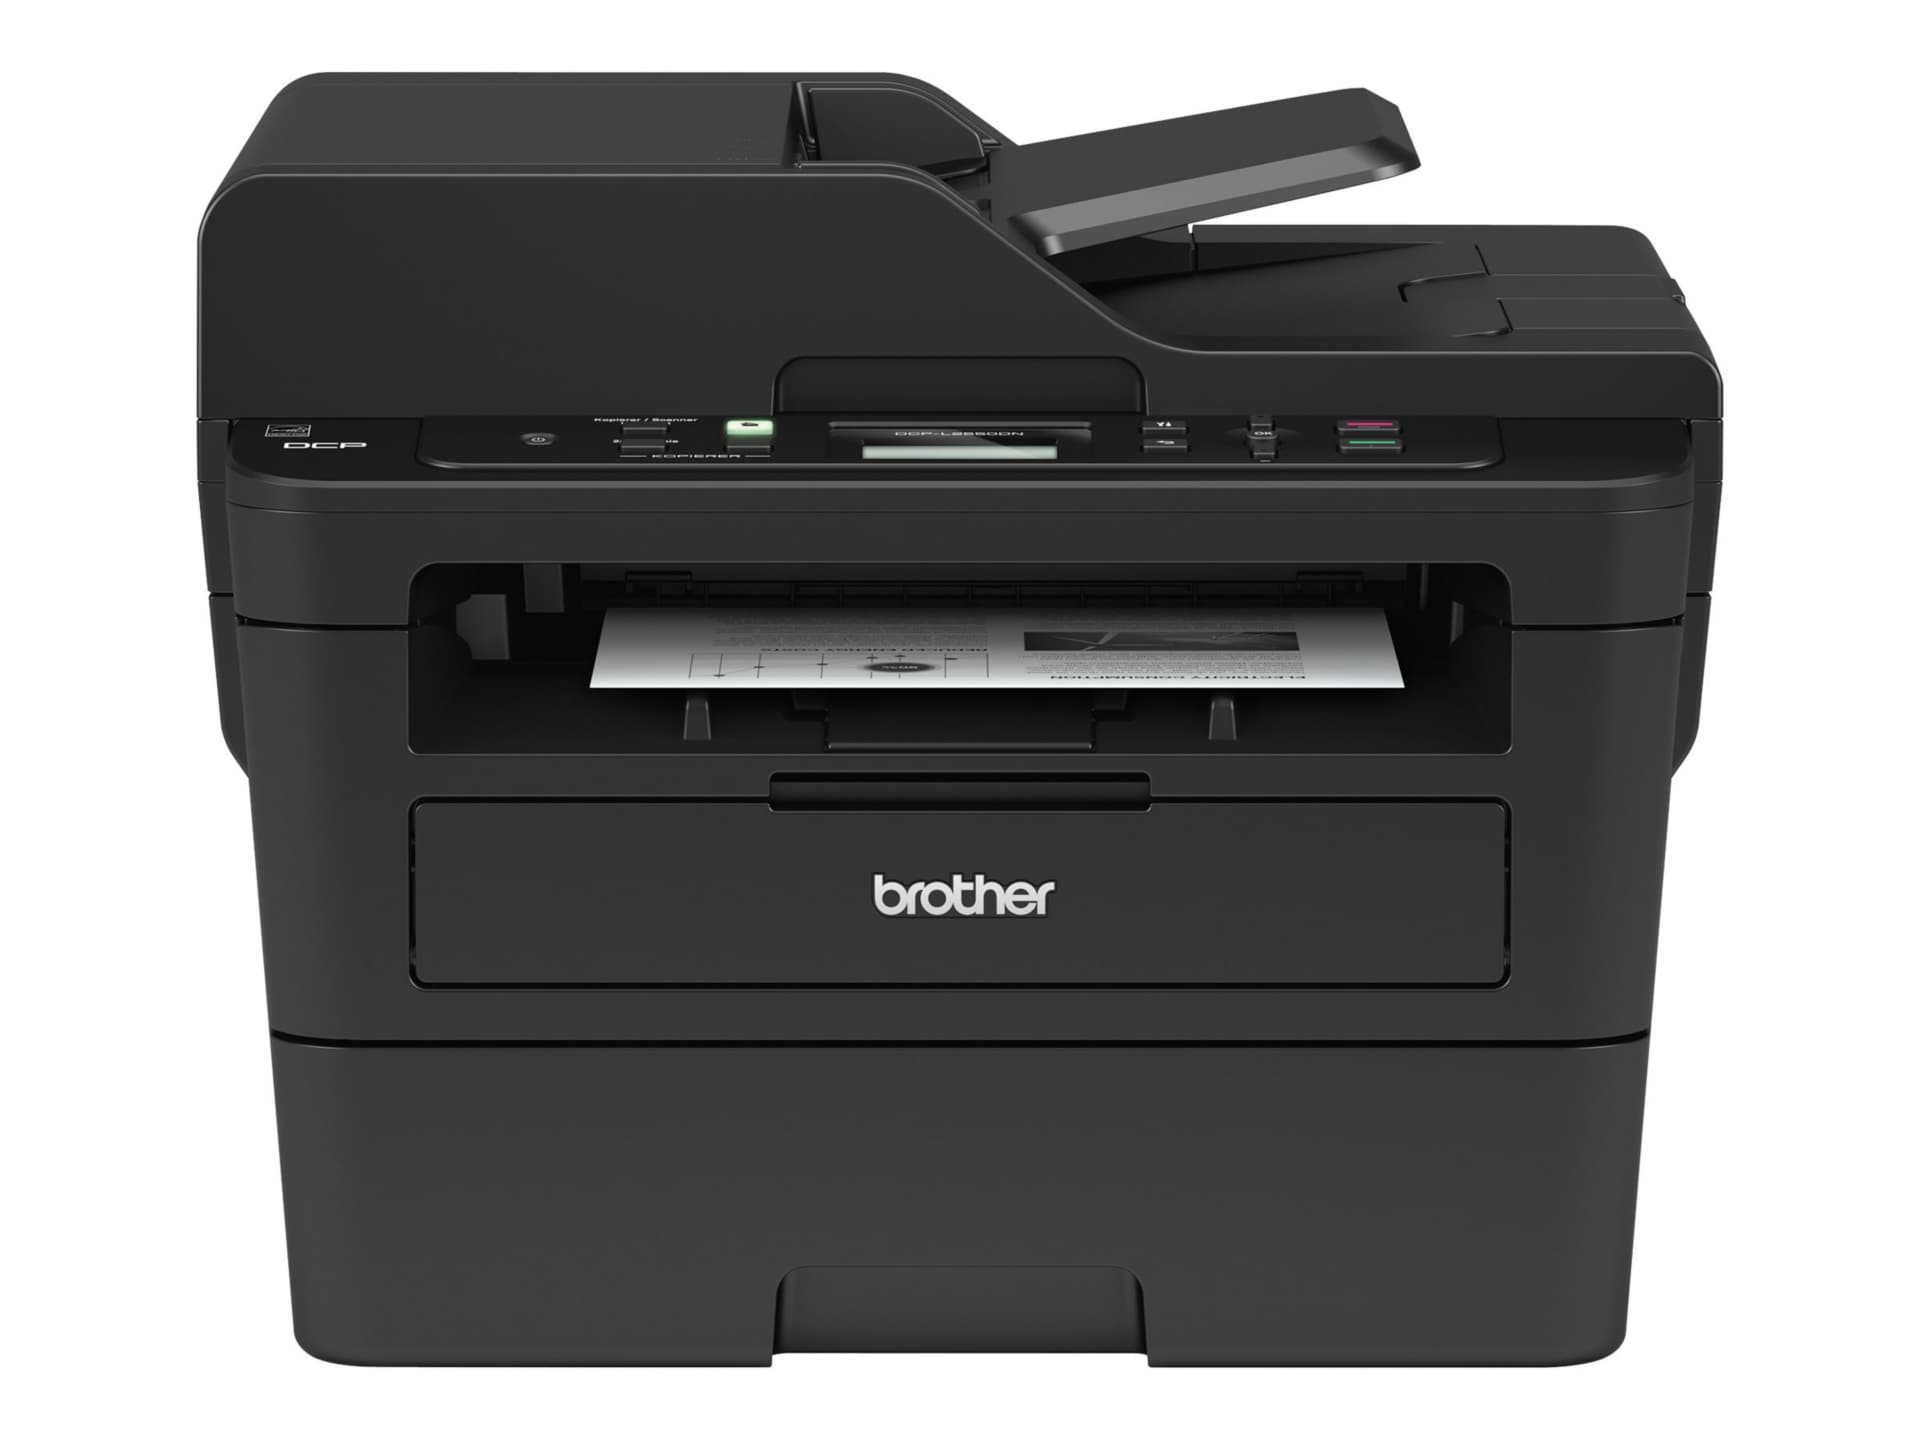 Brother DCP-L2550DW - multifunction printer - B/W - DCPL2550DW - All-in-One  Printers 